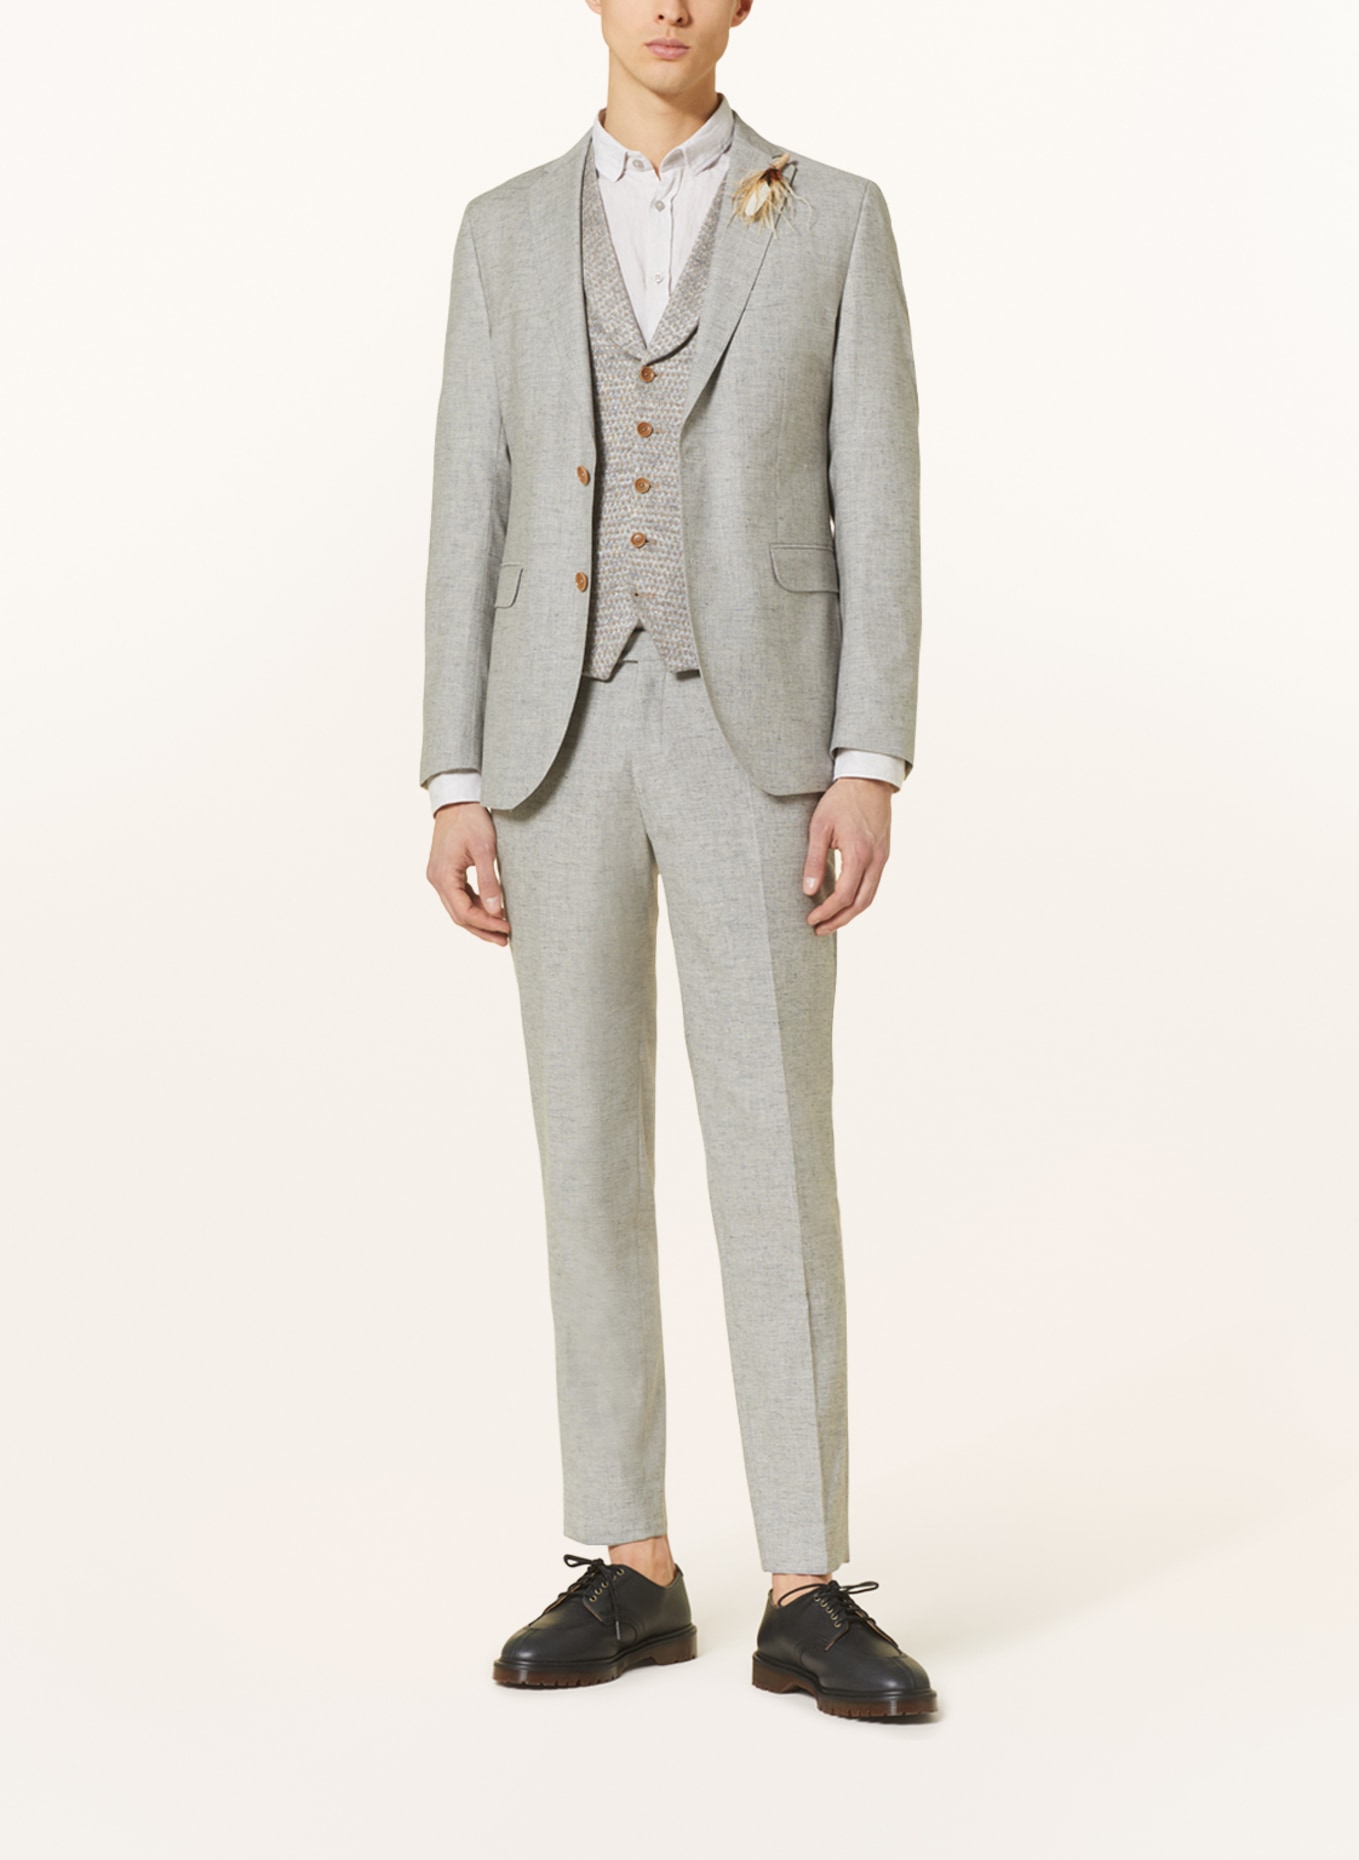 CG - CLUB of GENTS Suit trousers CG PACO slim fit, Color: LIGHT GRAY (Image 2)